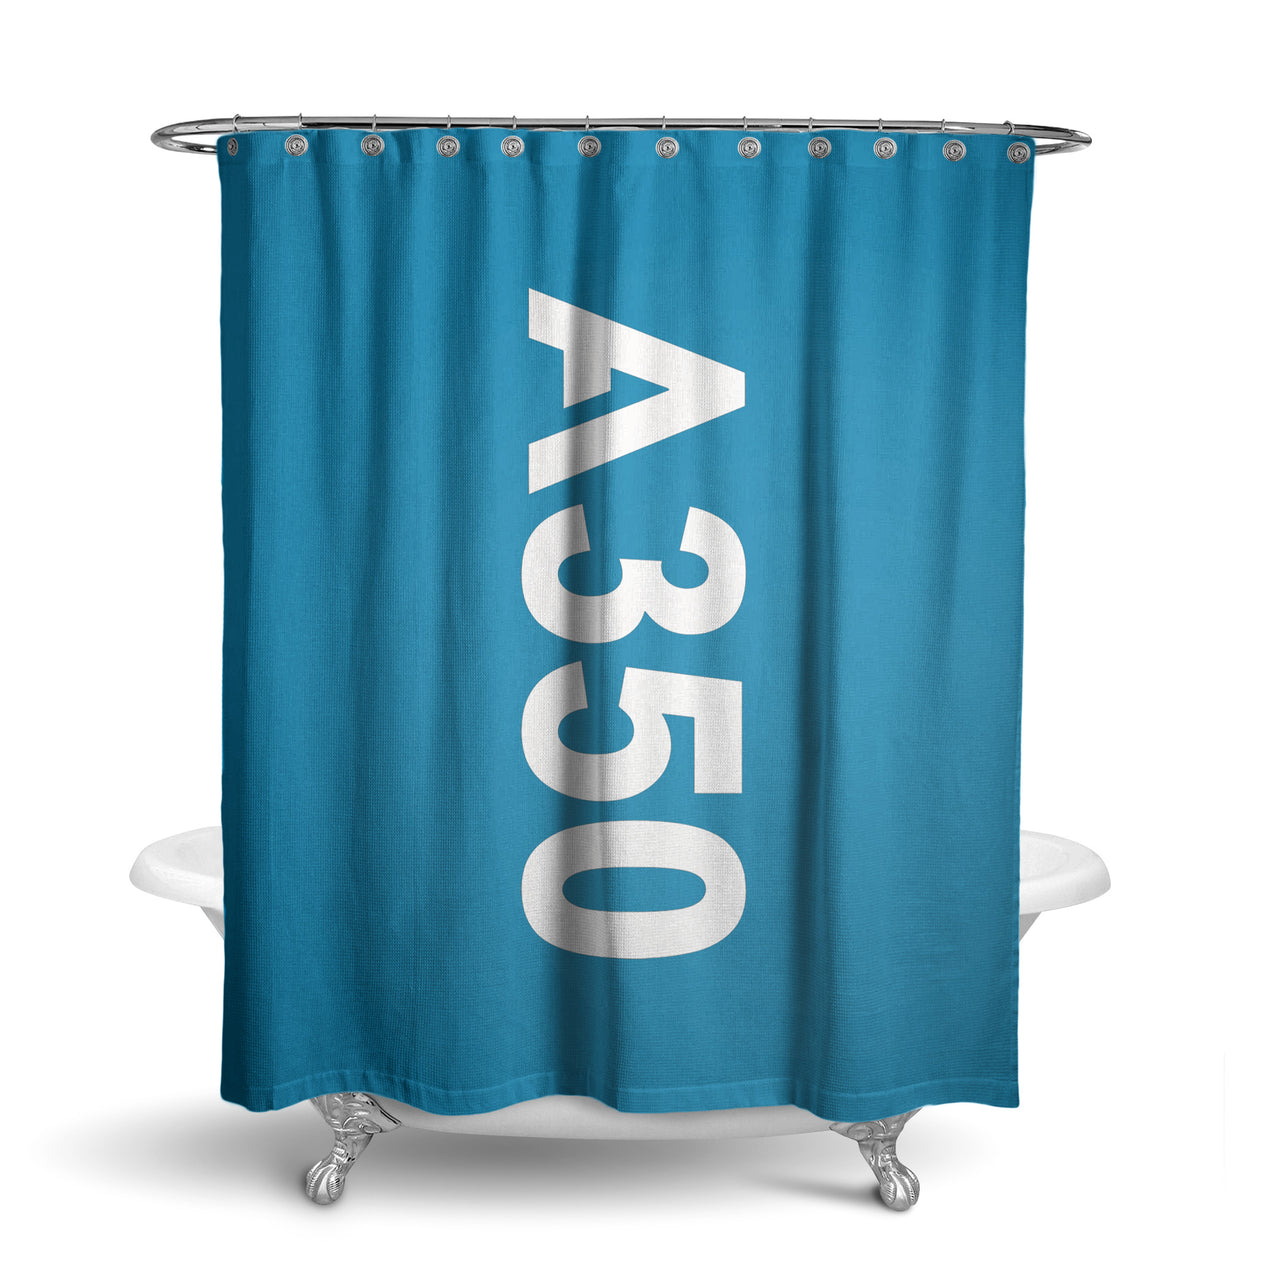 A350 Text Designed Shower Curtains